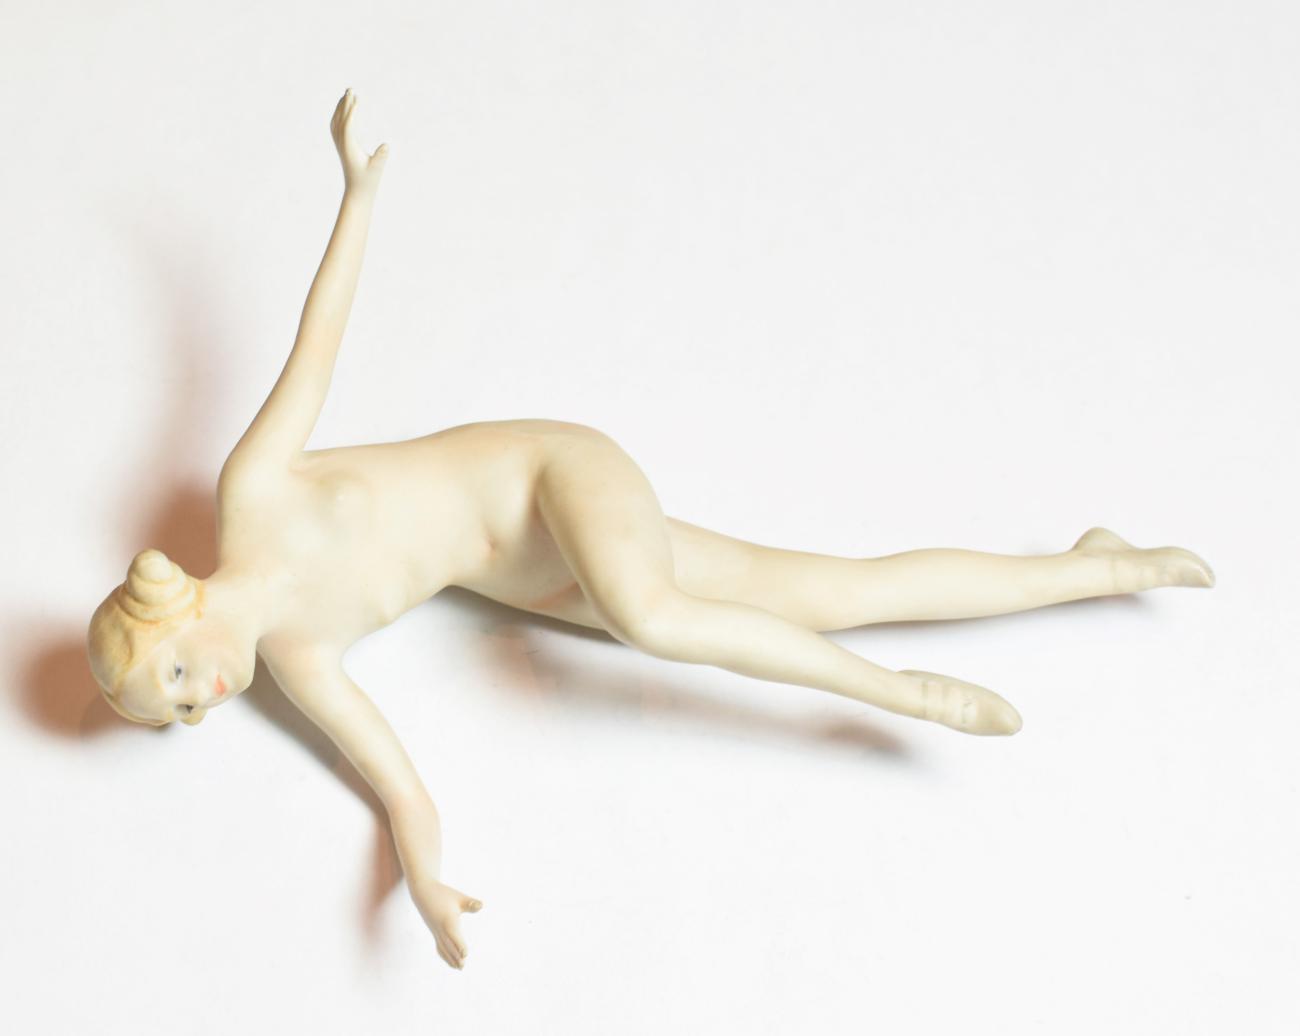 Lot 90 - An early 20th century German bisque figure of a nude young dancer, unmarked, modelled in action...